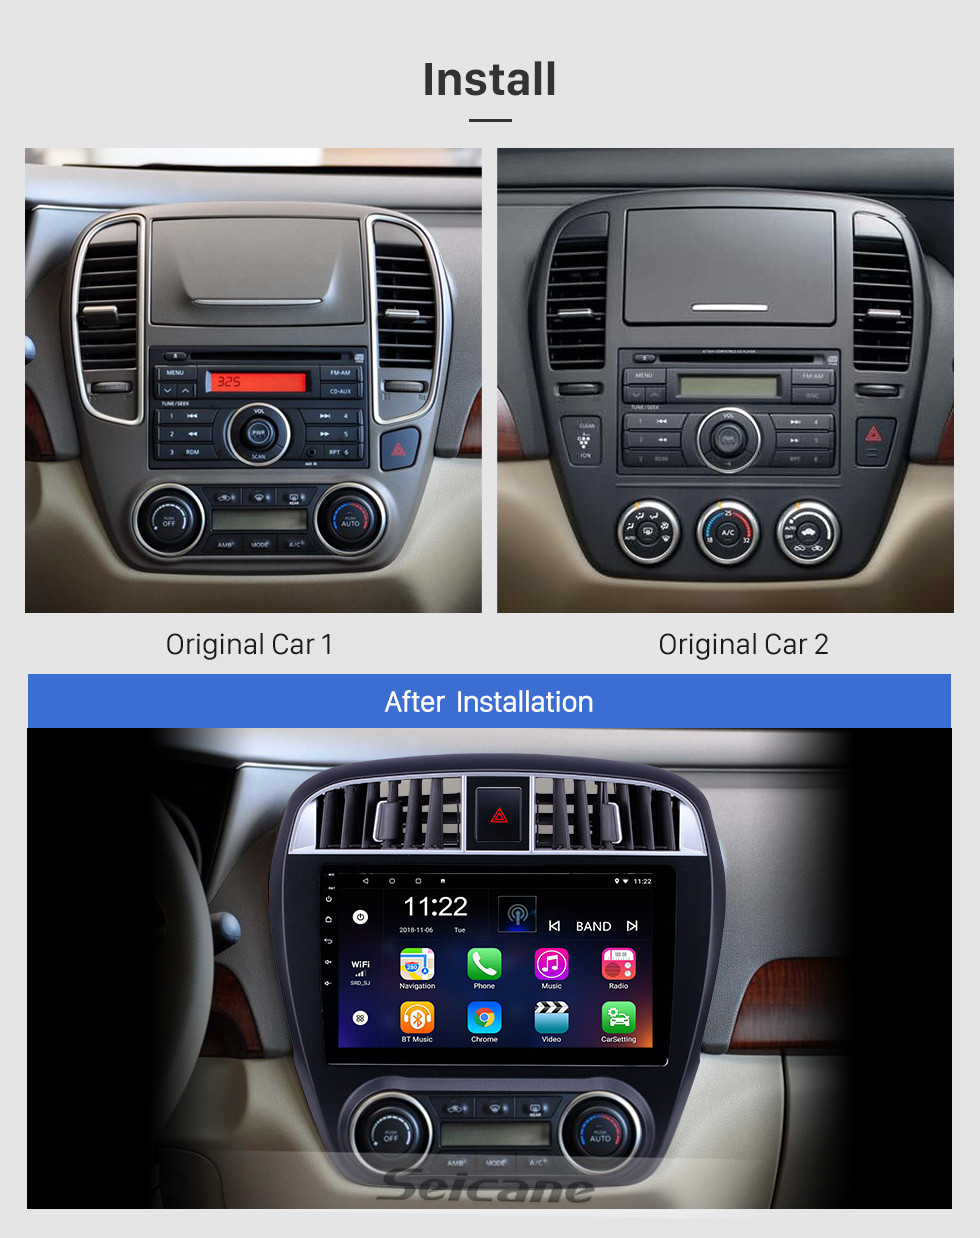 Seicane 10,1 pouces Android 10.0 HD Radio tactile Navigation GPS pour 2009 Nissan Sylphy avec support Bluetooth WIFI AUX Carplay Mirror Link